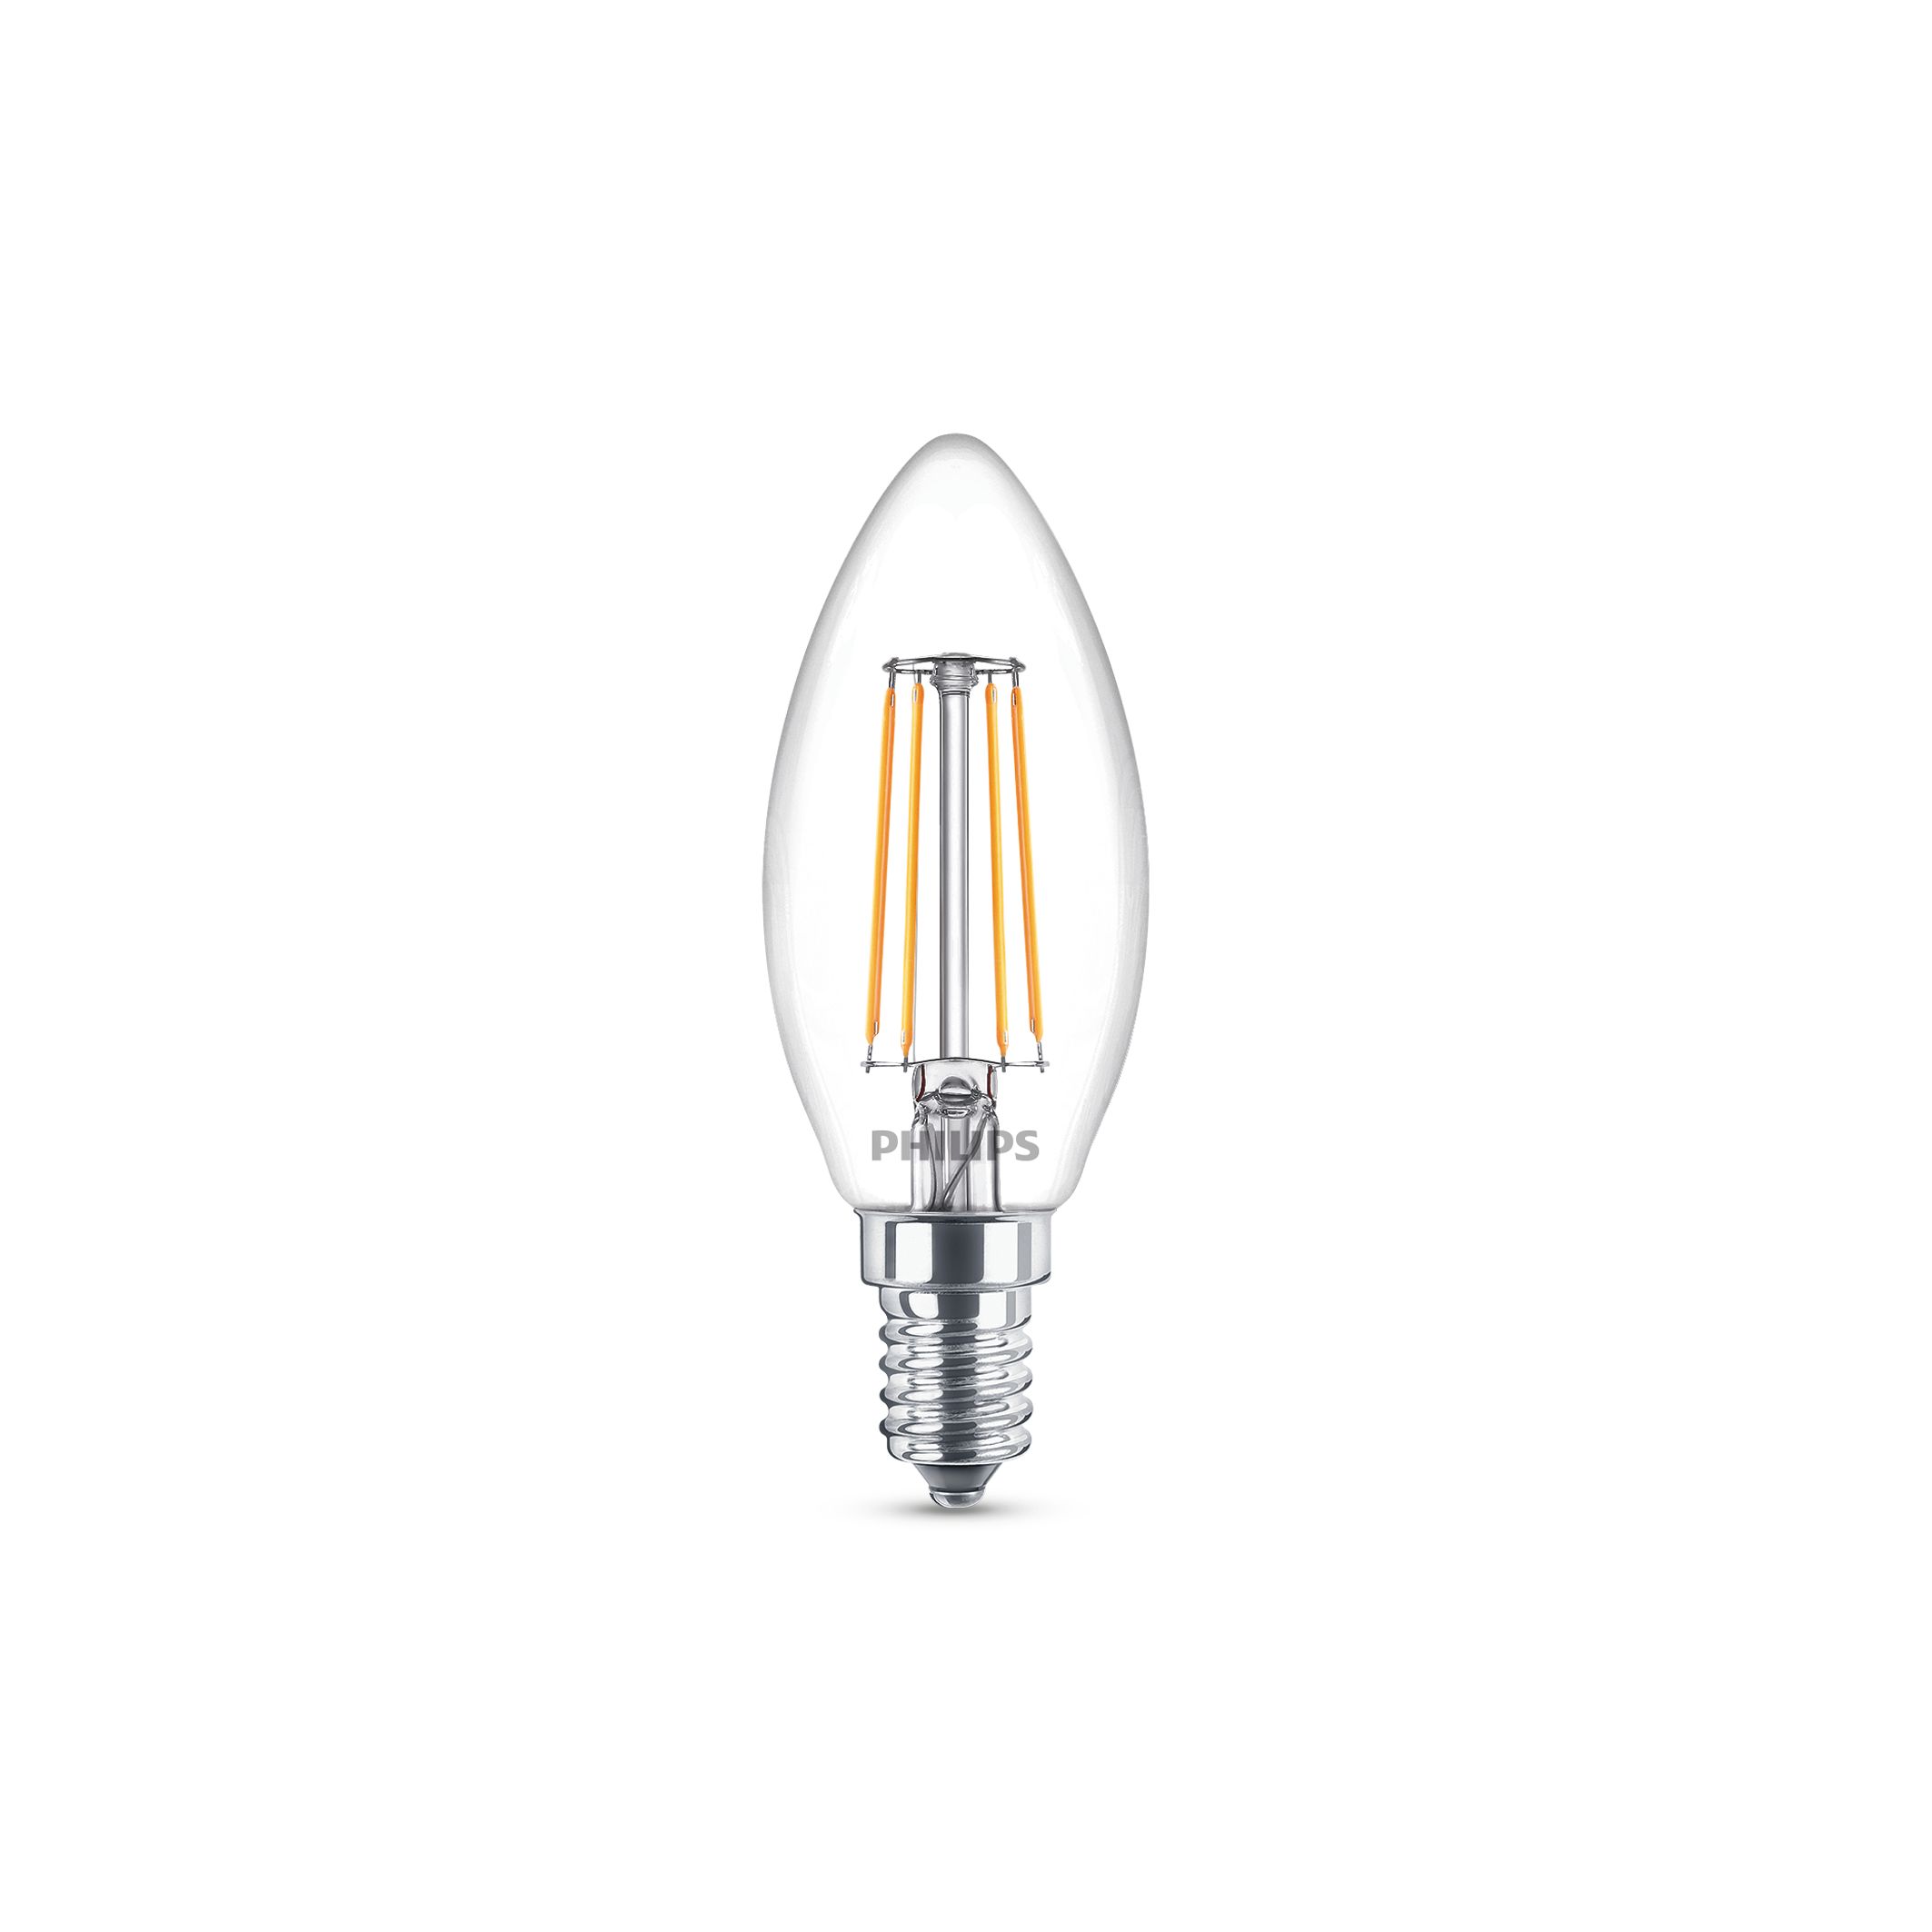 vrachtauto Herrie Onnauwkeurig Classic filament LED candles and lusters | 7178458 | Philips lighting